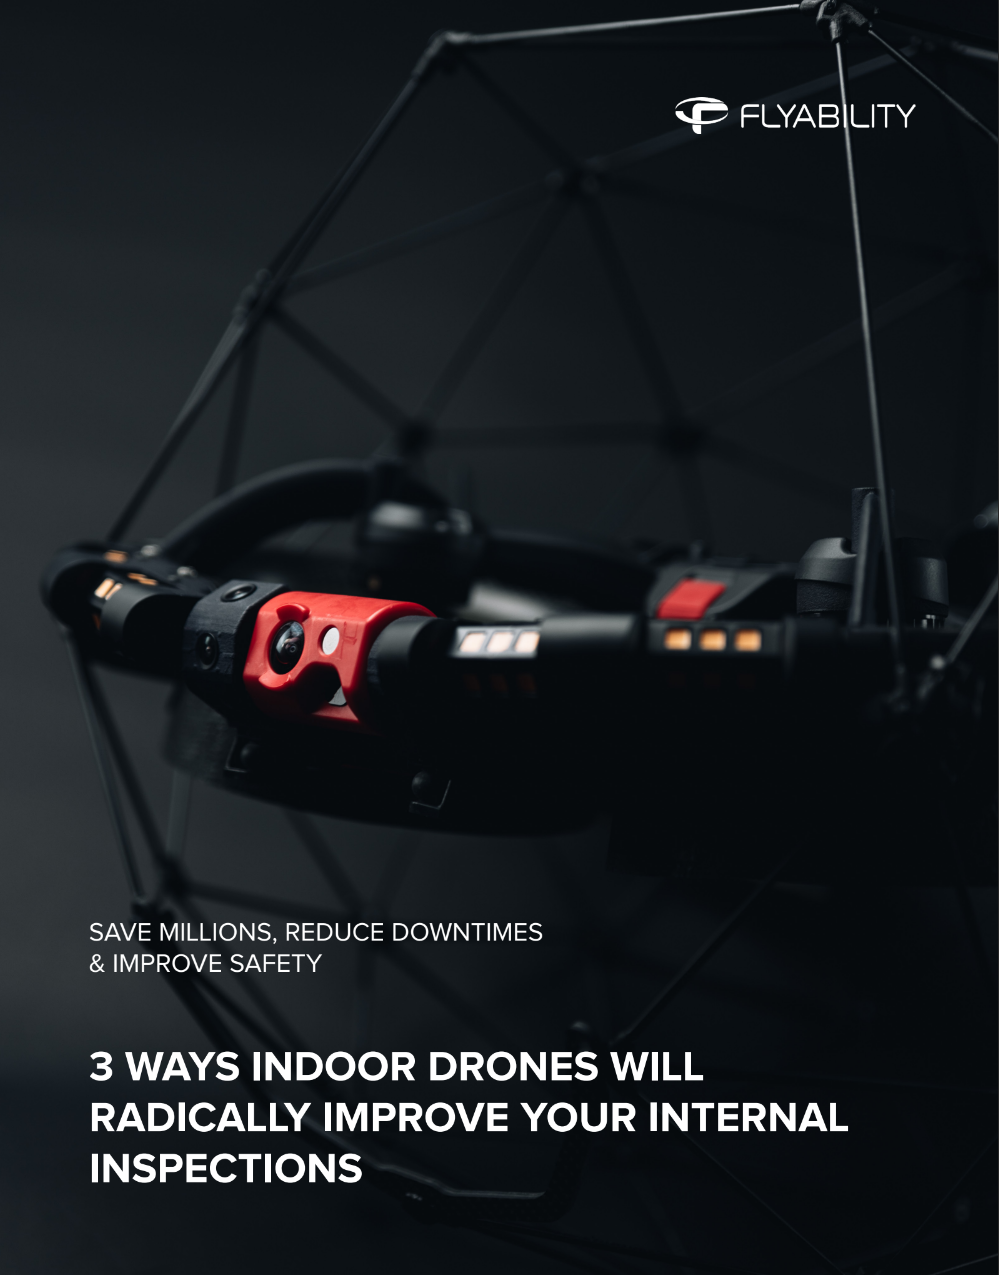 3 ways indoor drones will radically improve your internal inspections